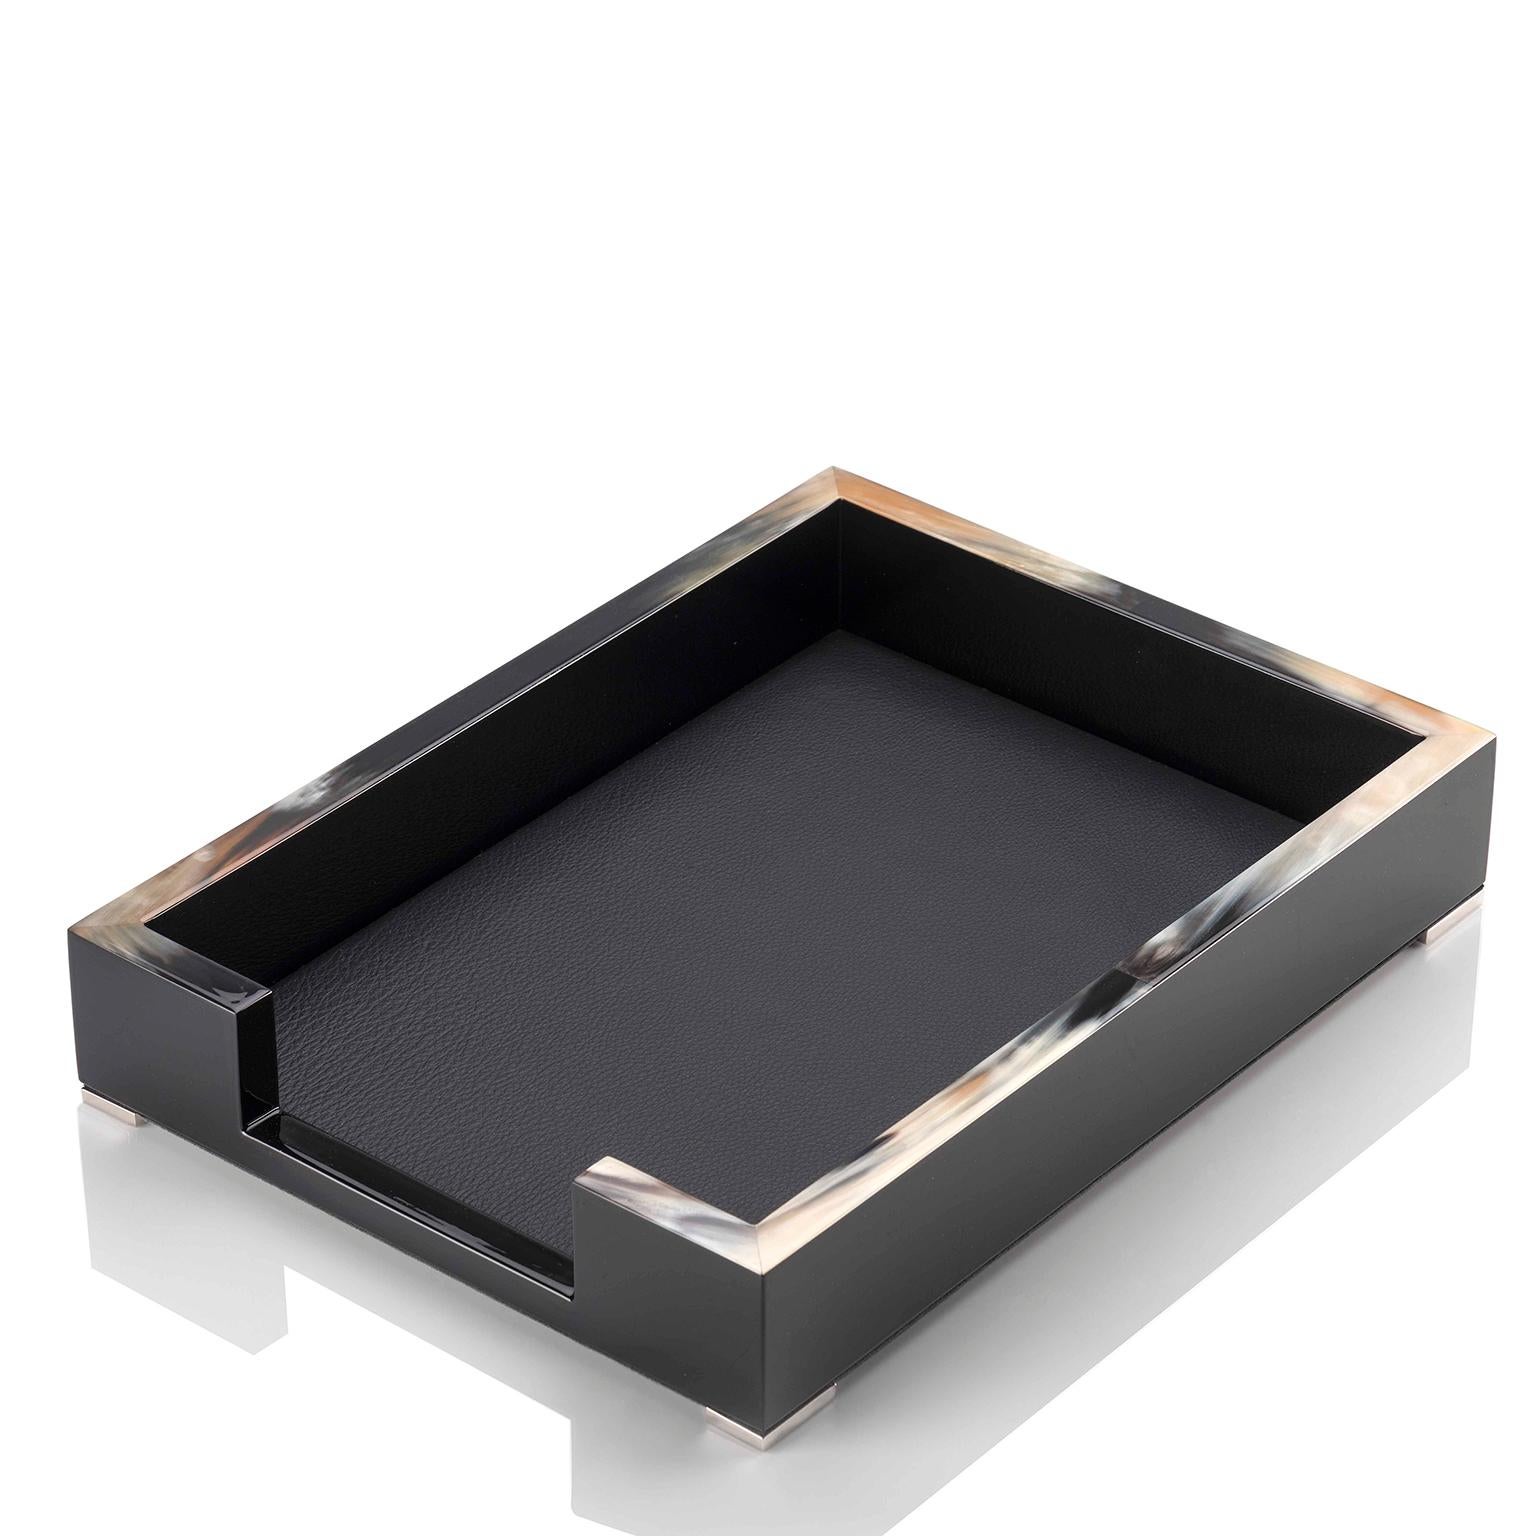 Perfect to store paperwork on your desk, the Calipso A4 paper tray is imbued with textural beauty. Crafted in glossy black lacquered wood, the design is added an elegant allure by beautiful details in Corno Italiano. Featuring a precious internal